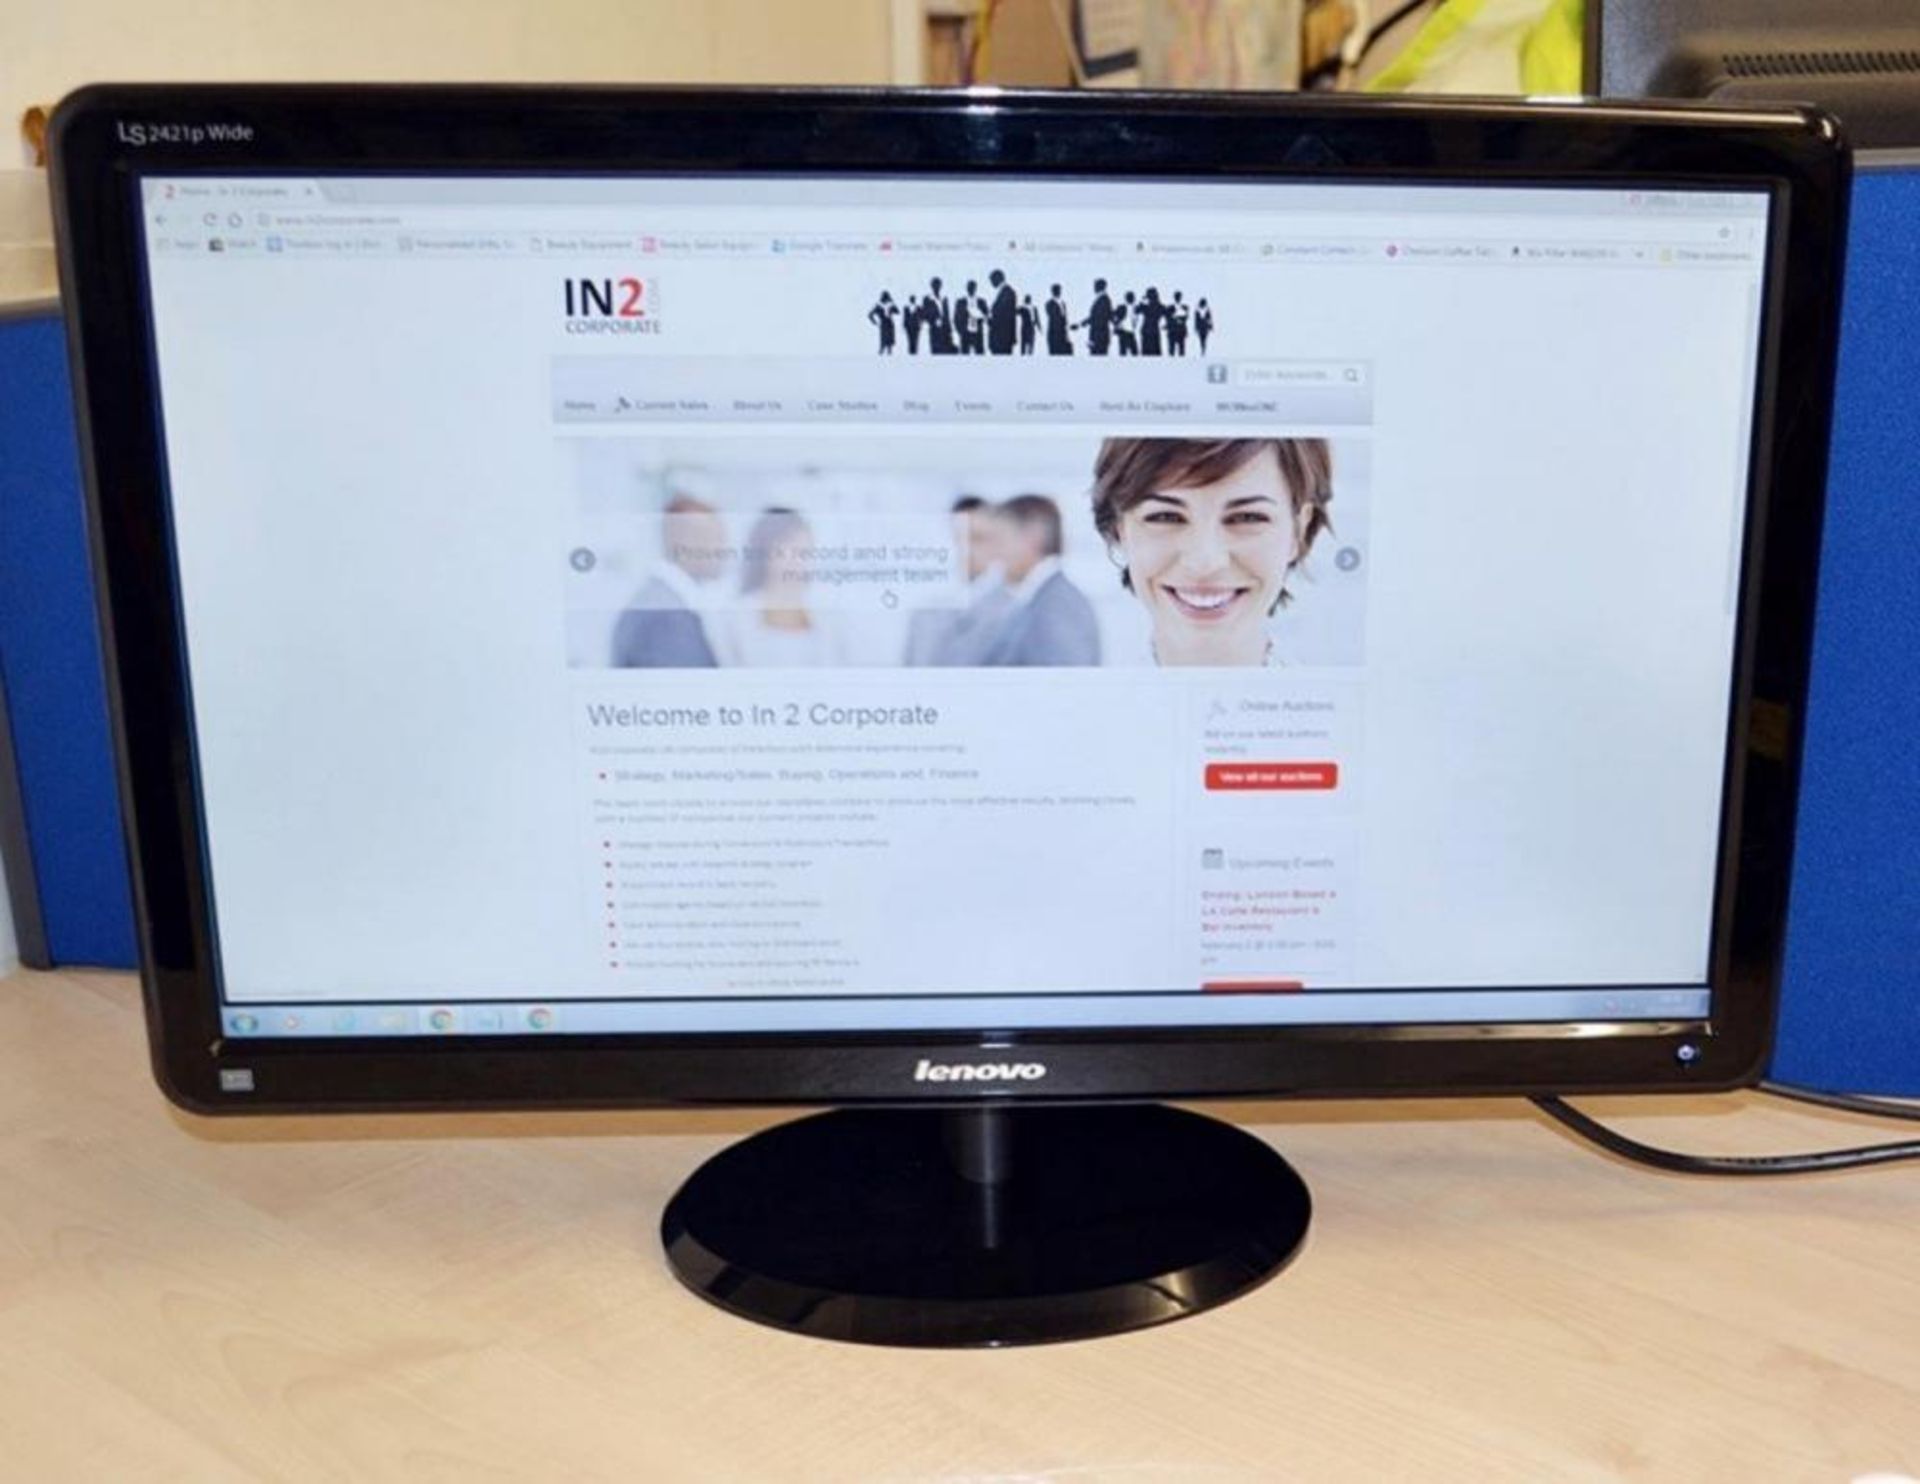 1 x Lenovo LS2421p Wide 23.6" Full HD LED TFT Monitor (Model: 4015-LS1) - Recently Taken From A - Image 3 of 6